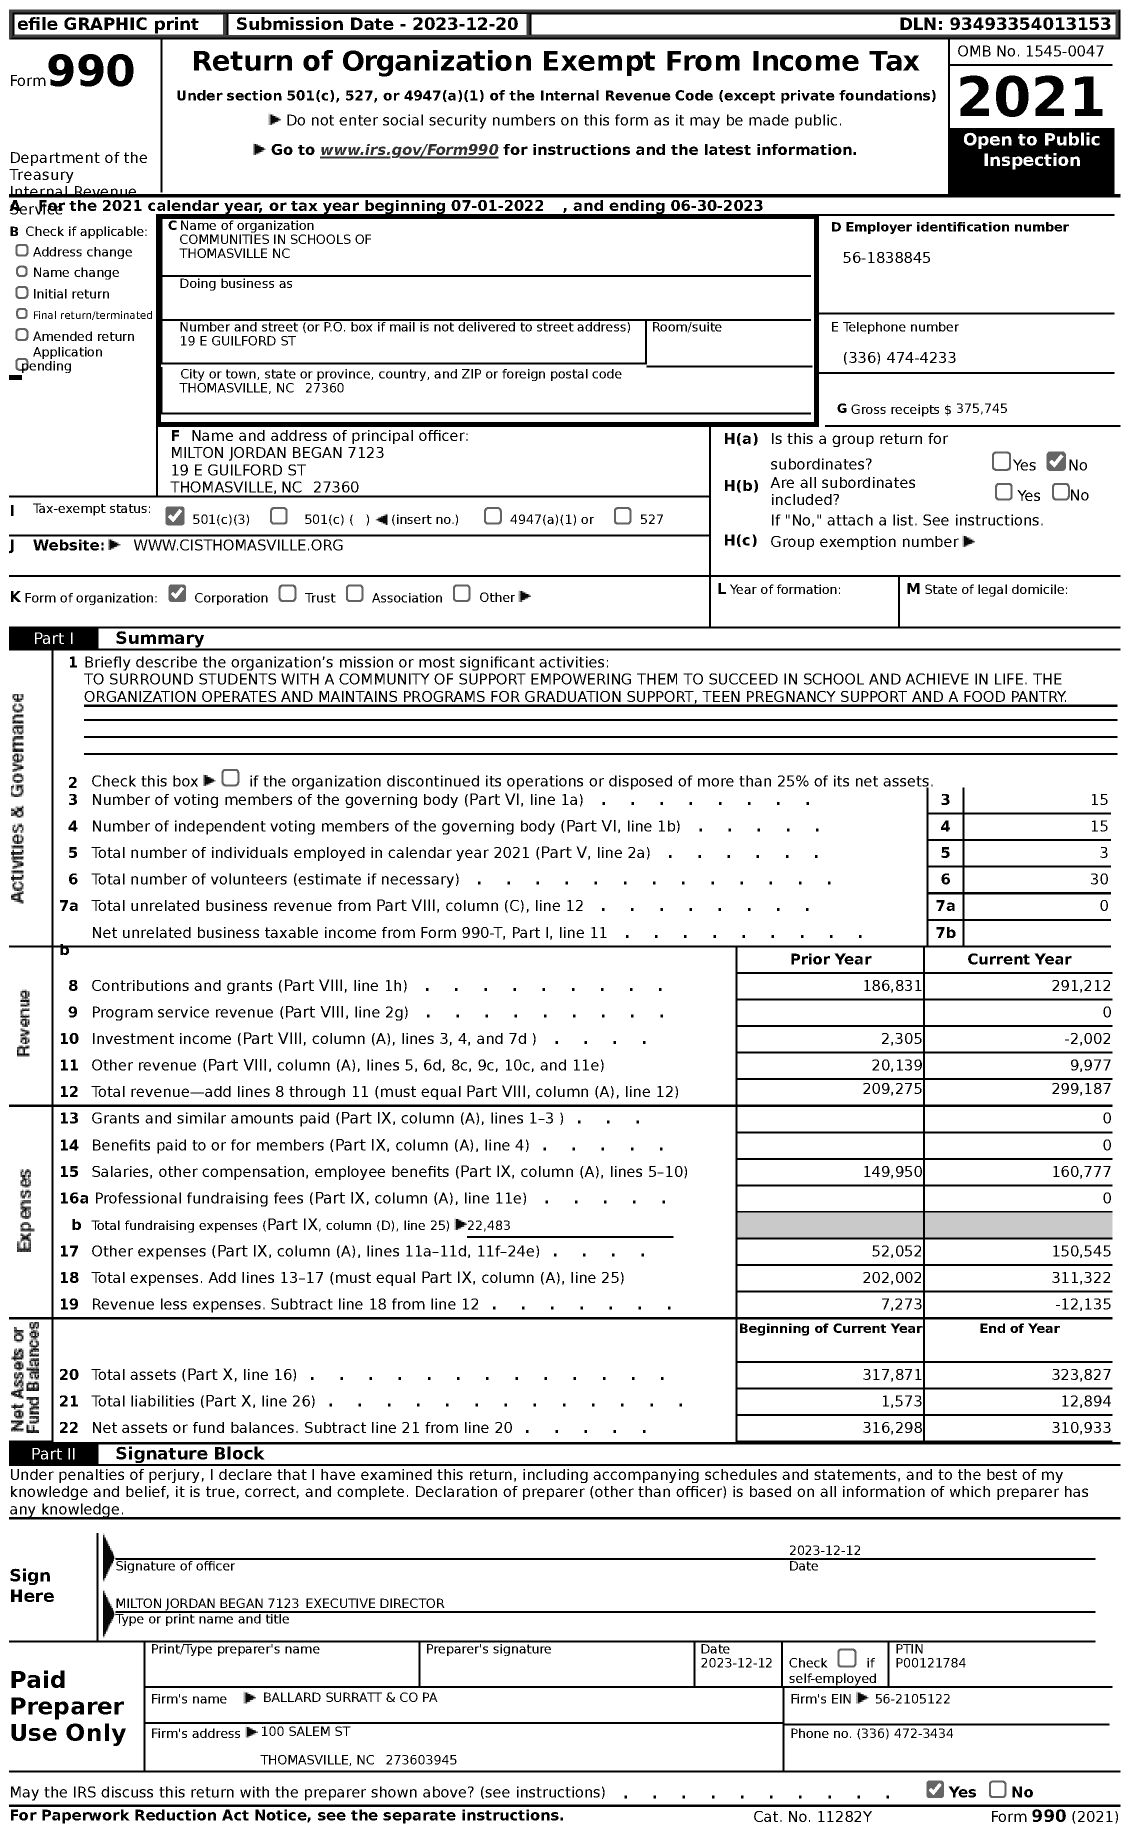 Image of first page of 2022 Form 990 for Communities in Schools of Thomasville NC